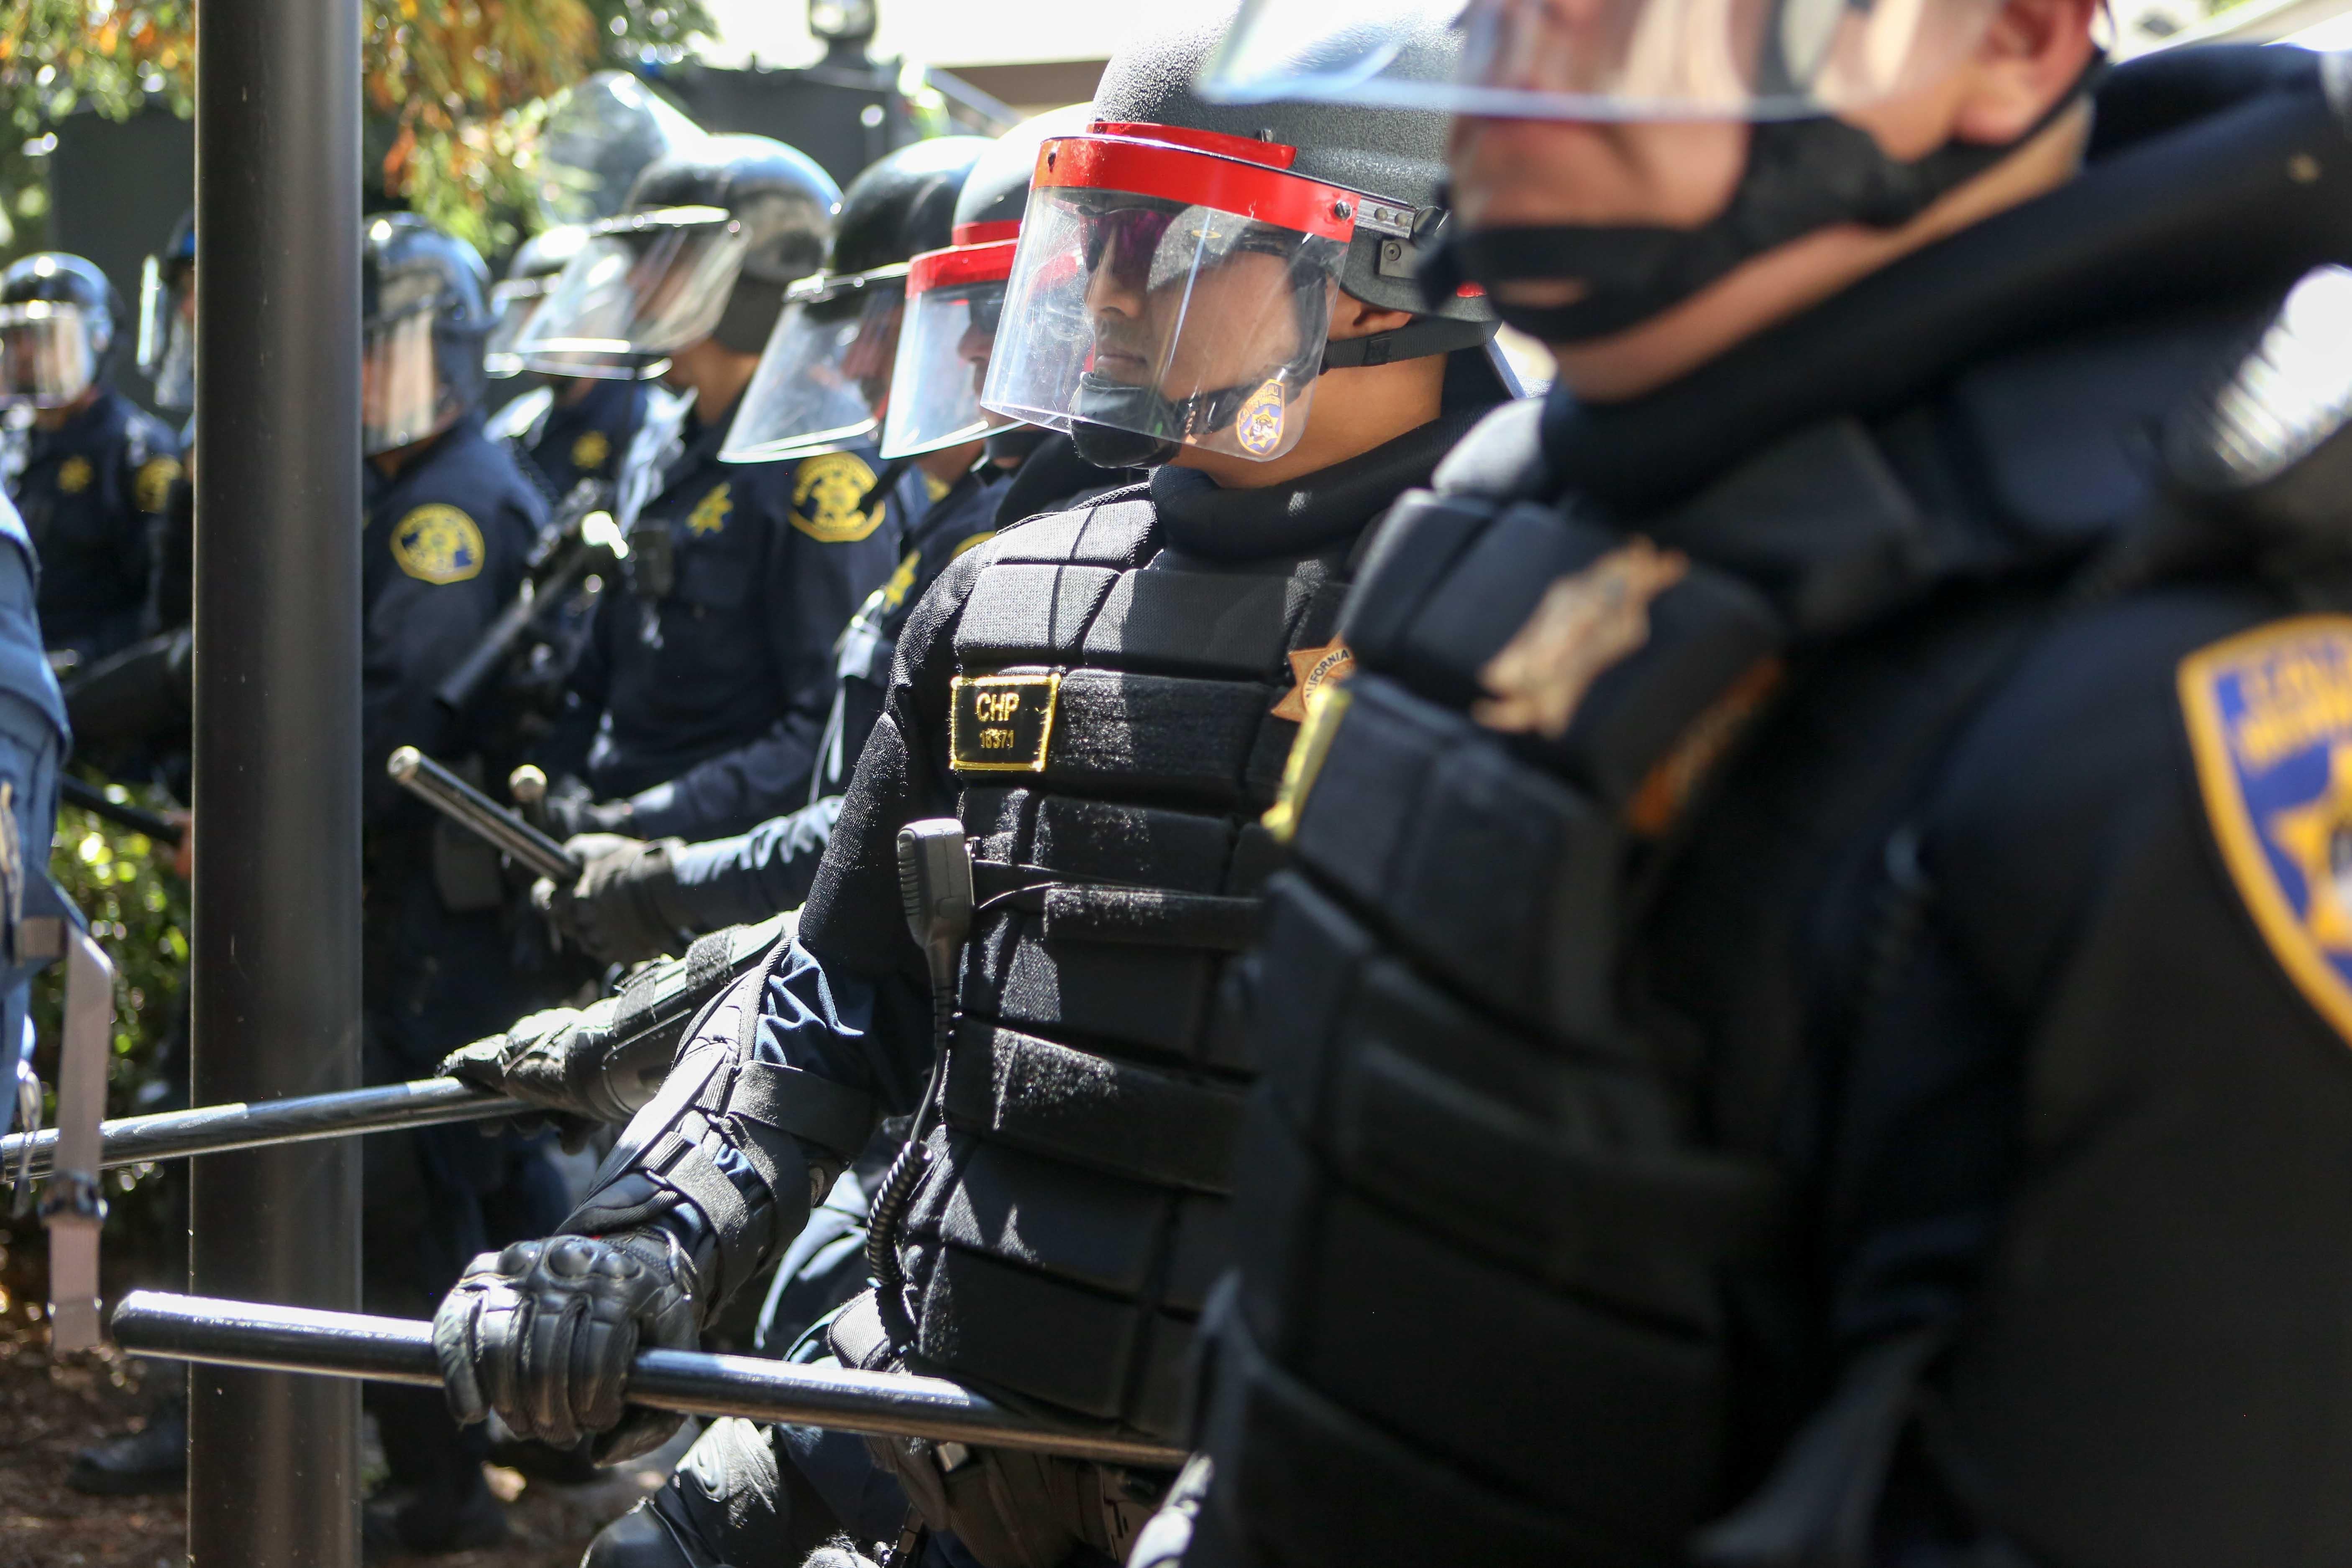 A row of police officers in heavy protective gear, some holding sticks.